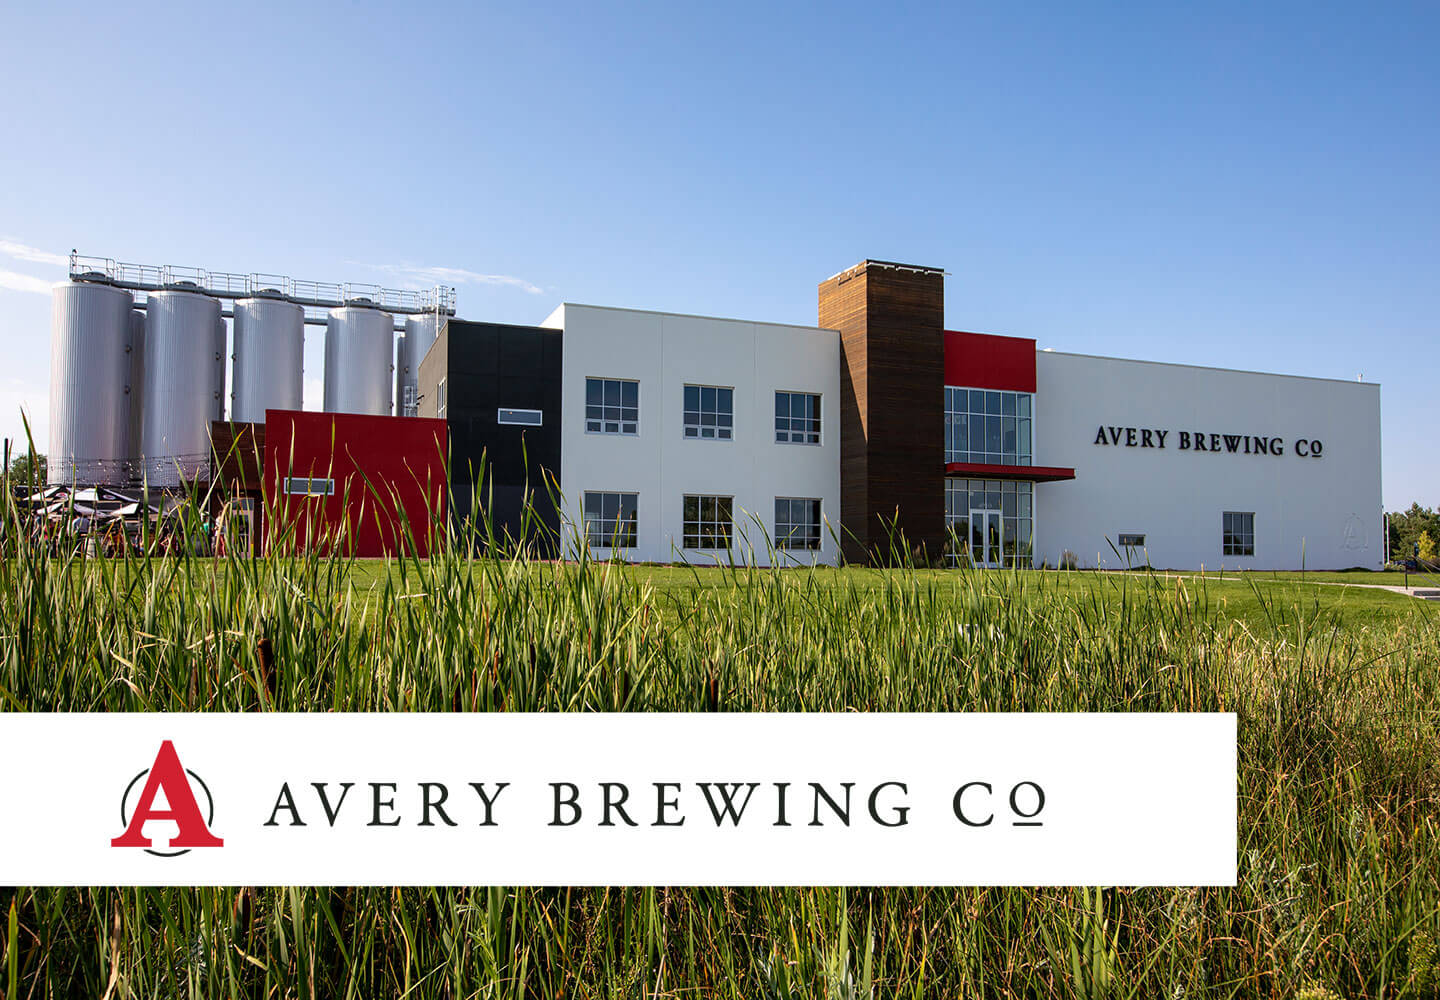 Exterior of Avery Brewing Co.